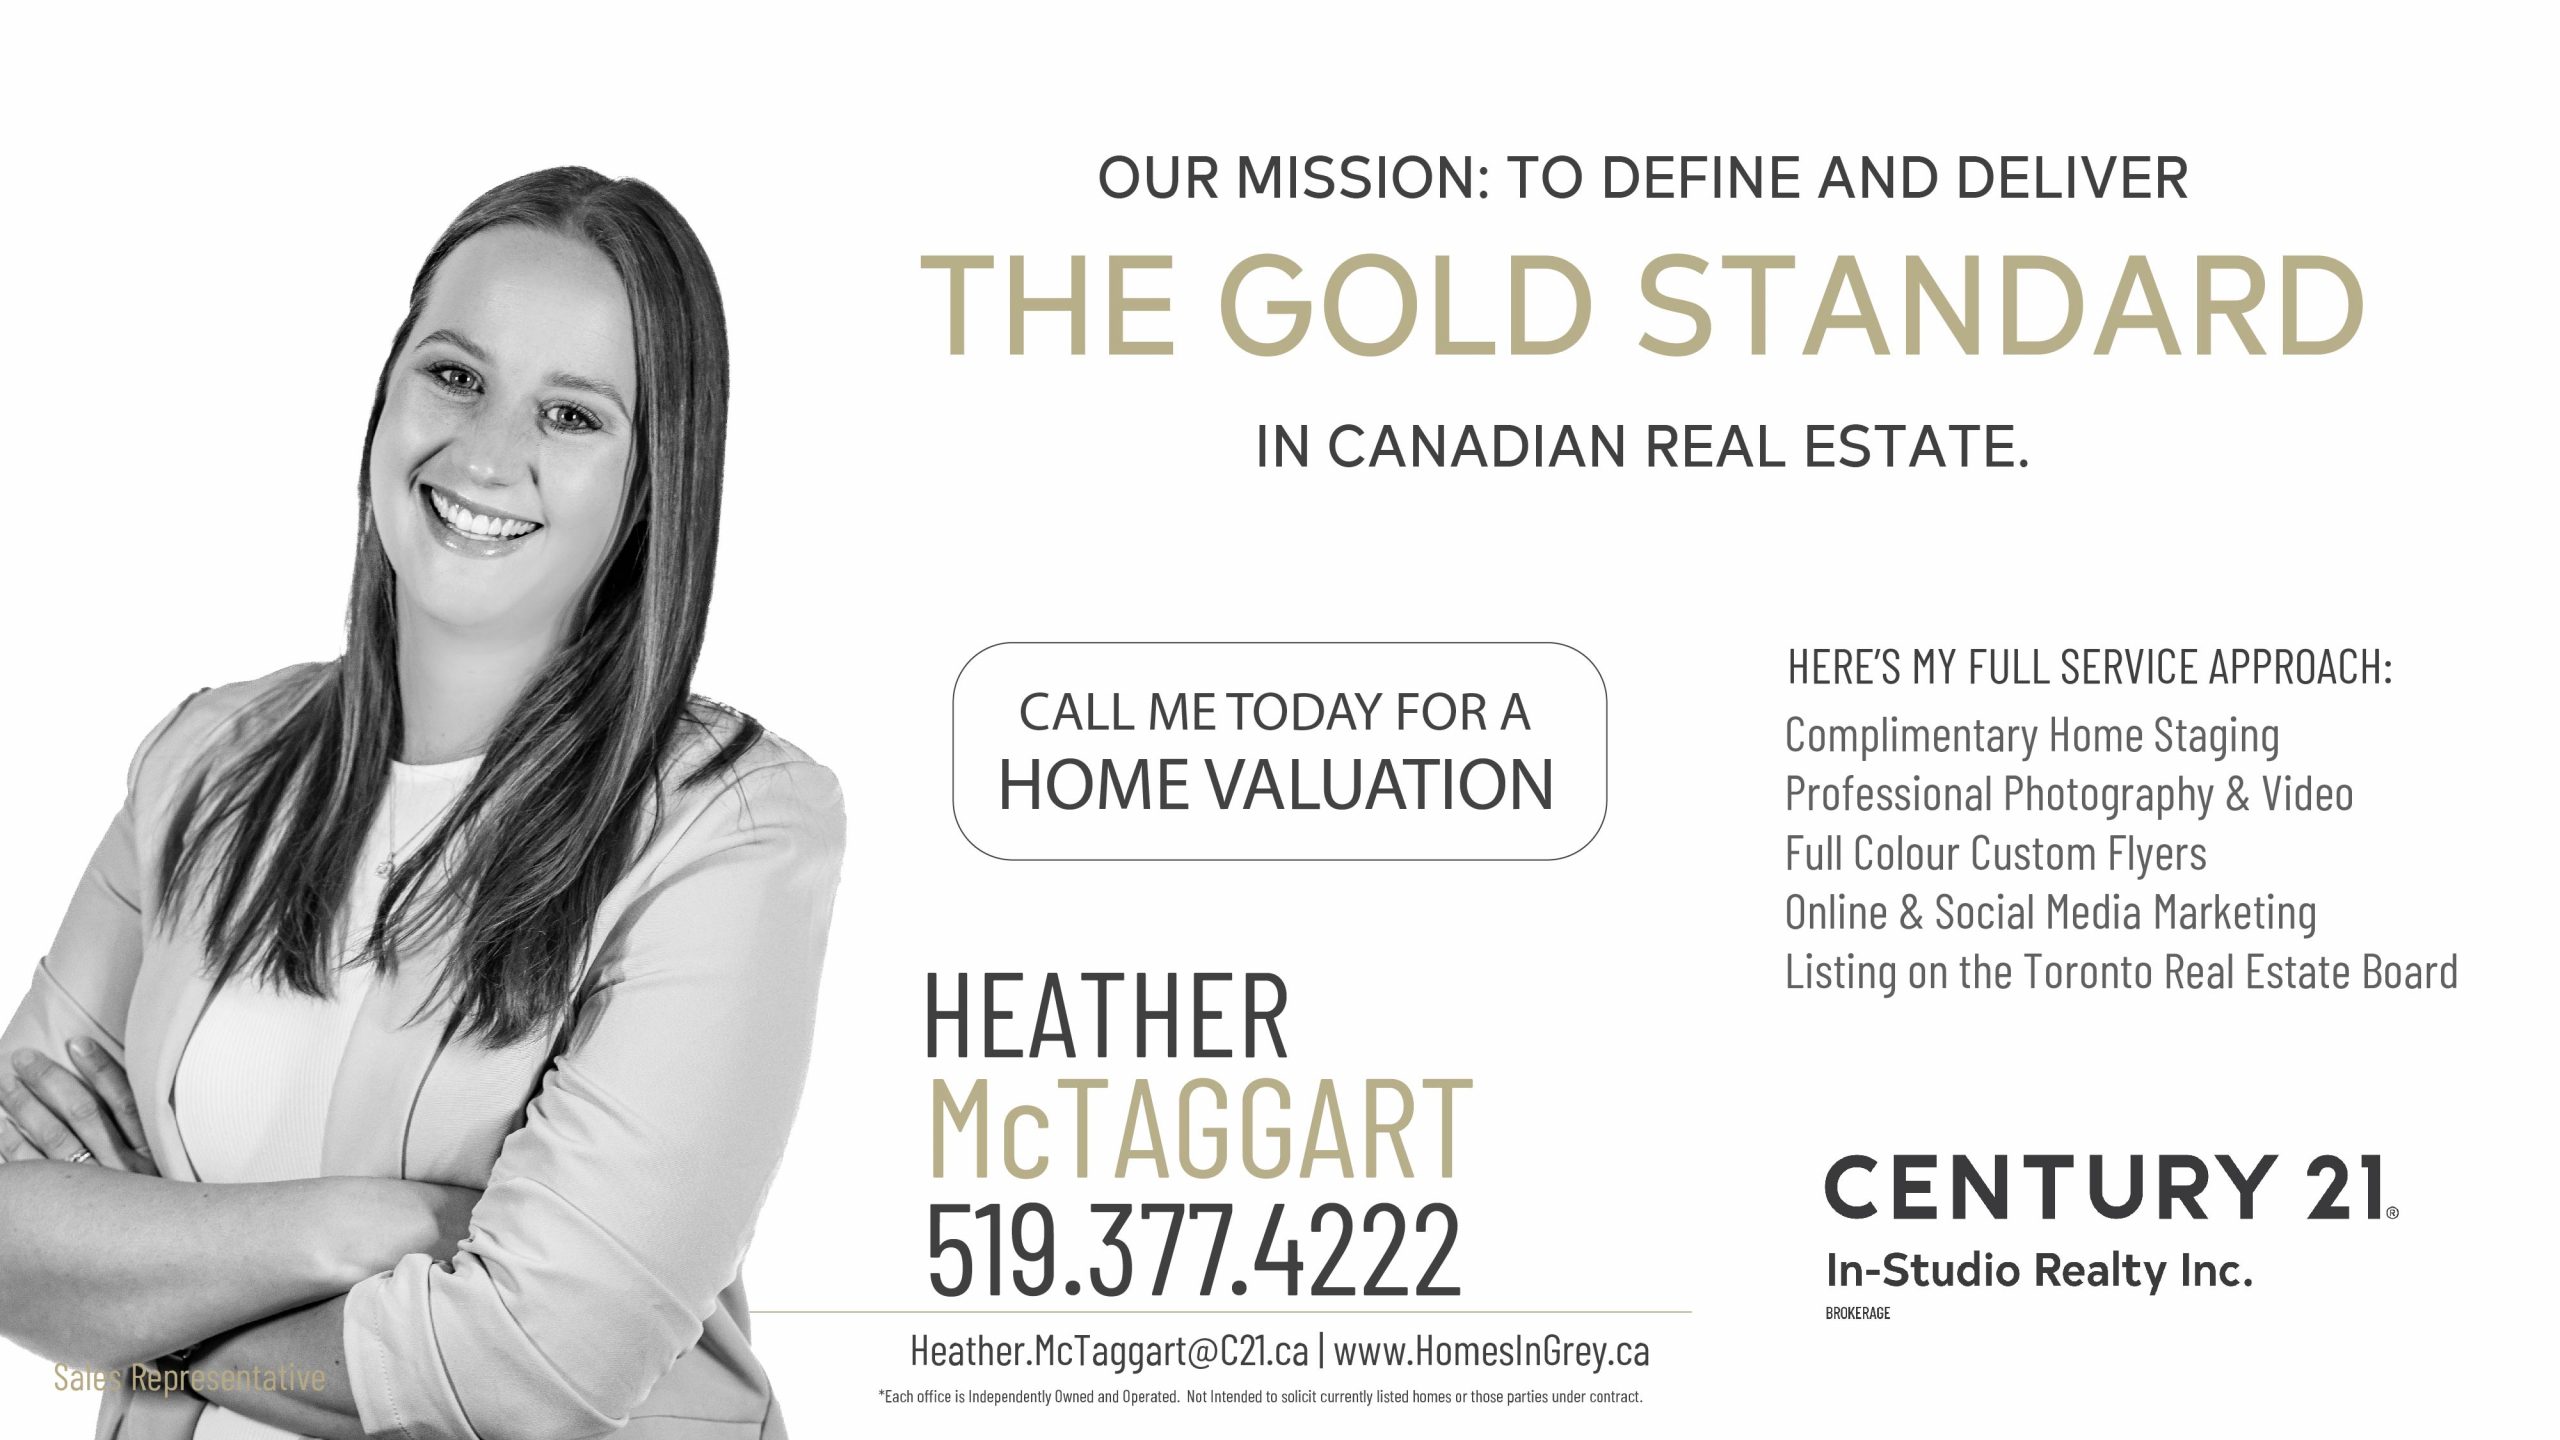 Heather McTaggart, Grey Highlands Real Estate Agent